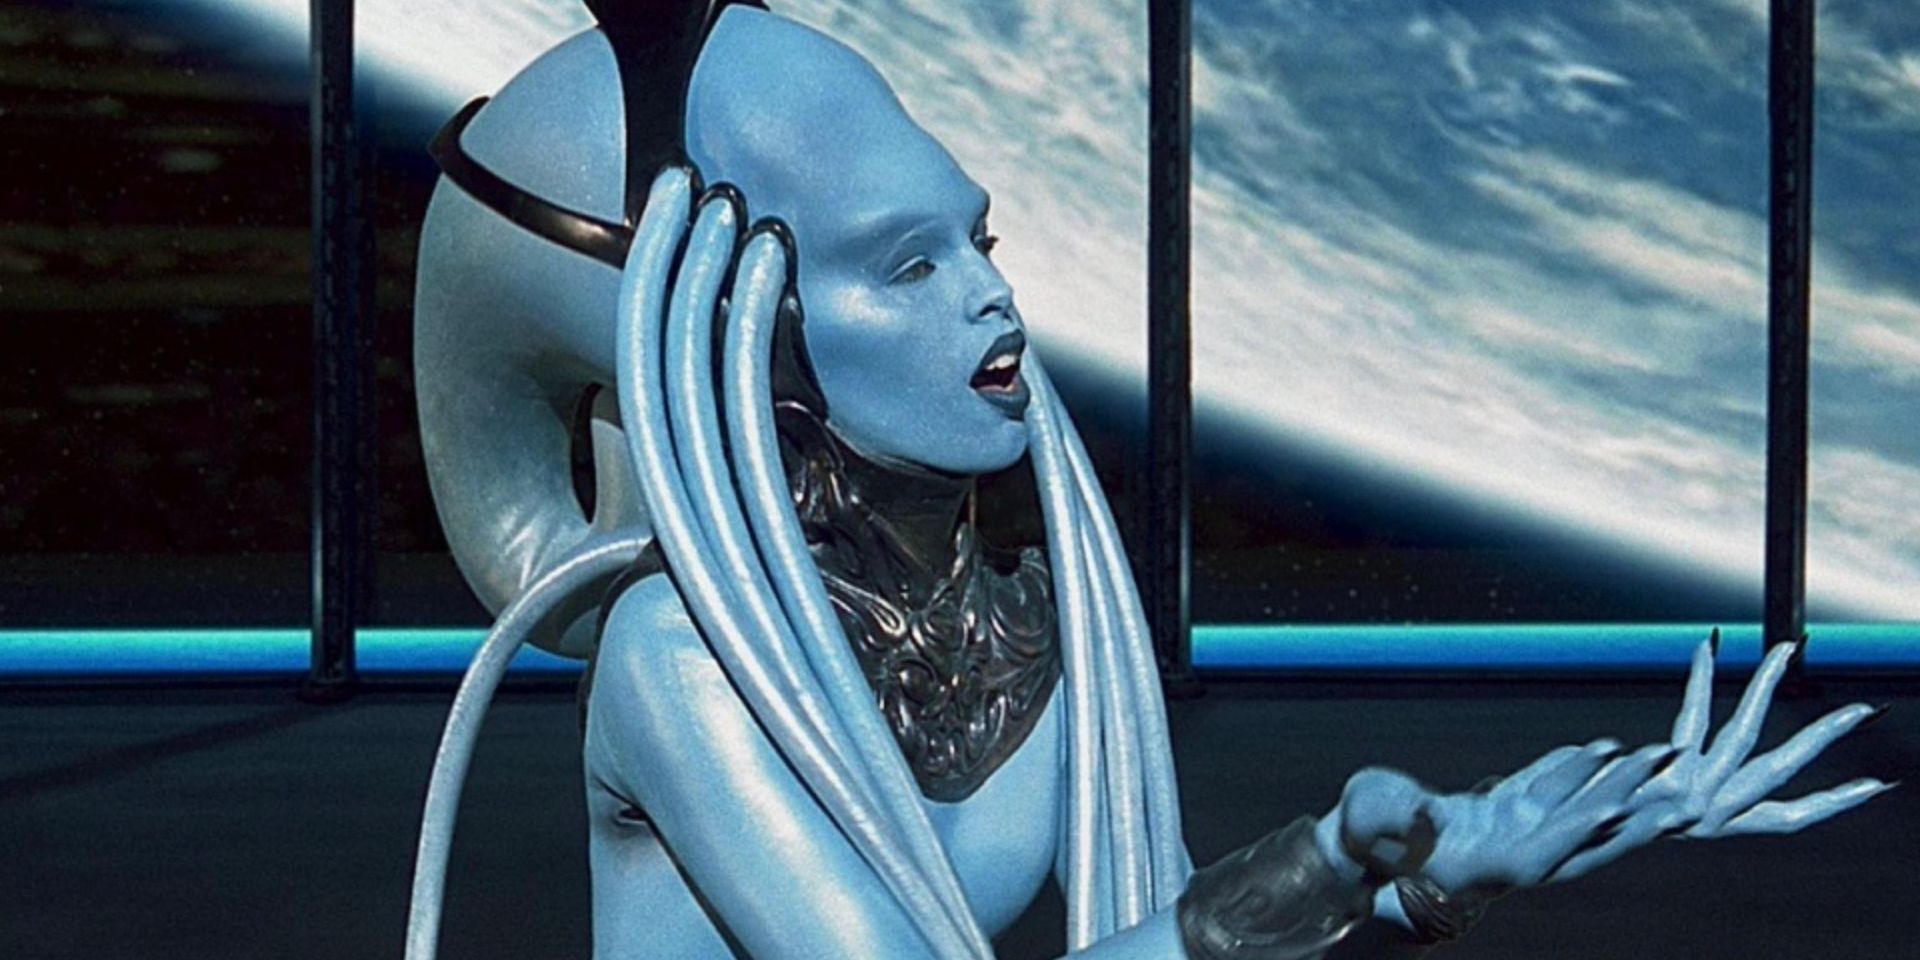 The diva performs her aria in The Fifth Element